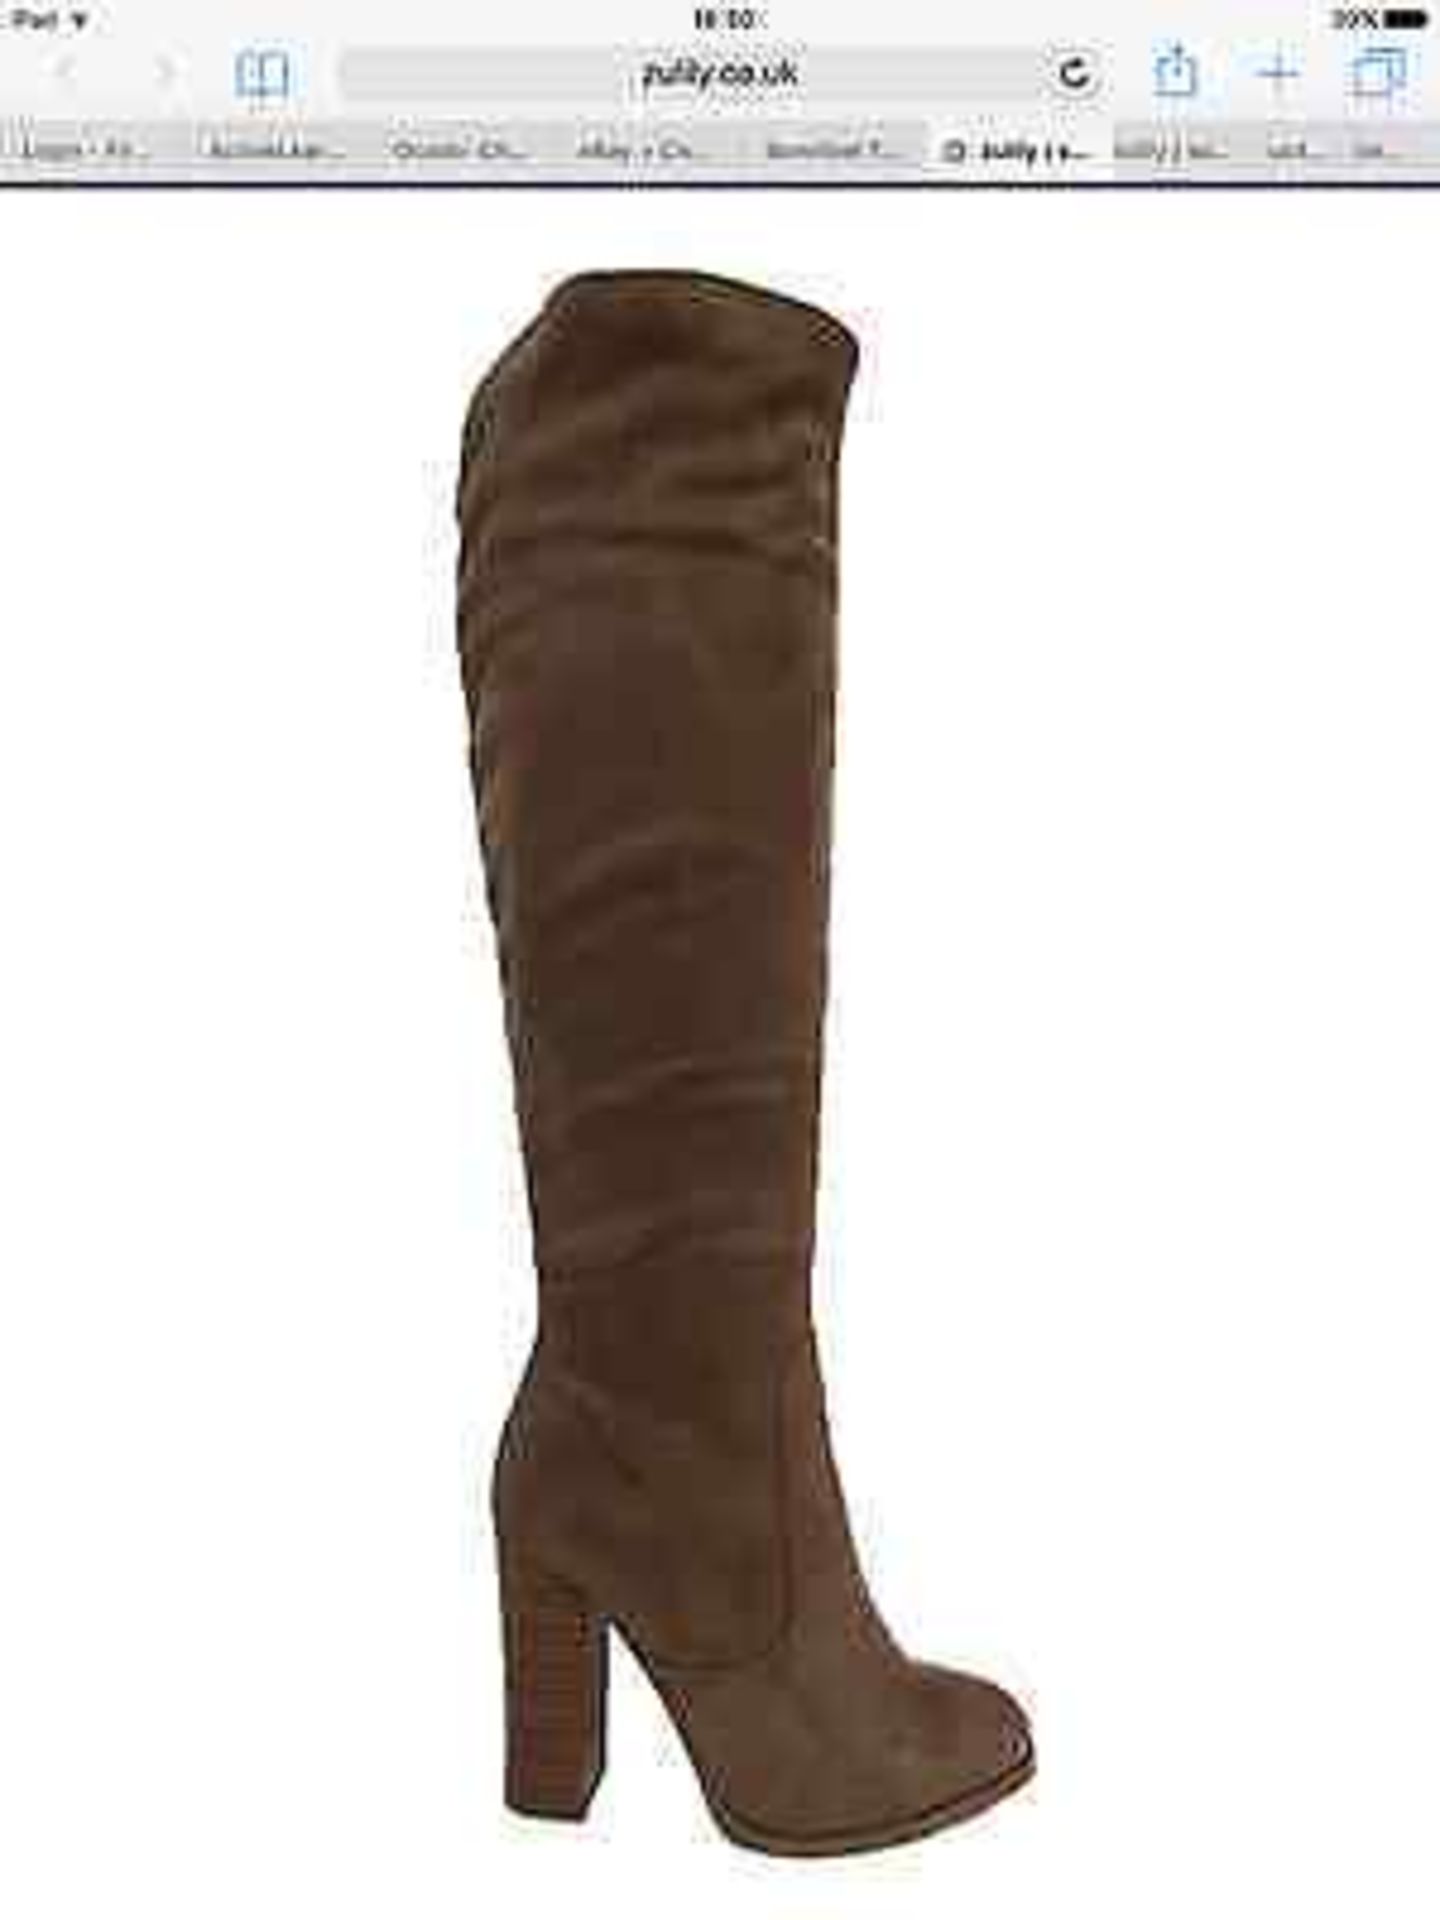 X2B Taupe Baina Boot, Size 6.5-7 (New with box) [Ref: 41703523- G-003] - Image 2 of 3